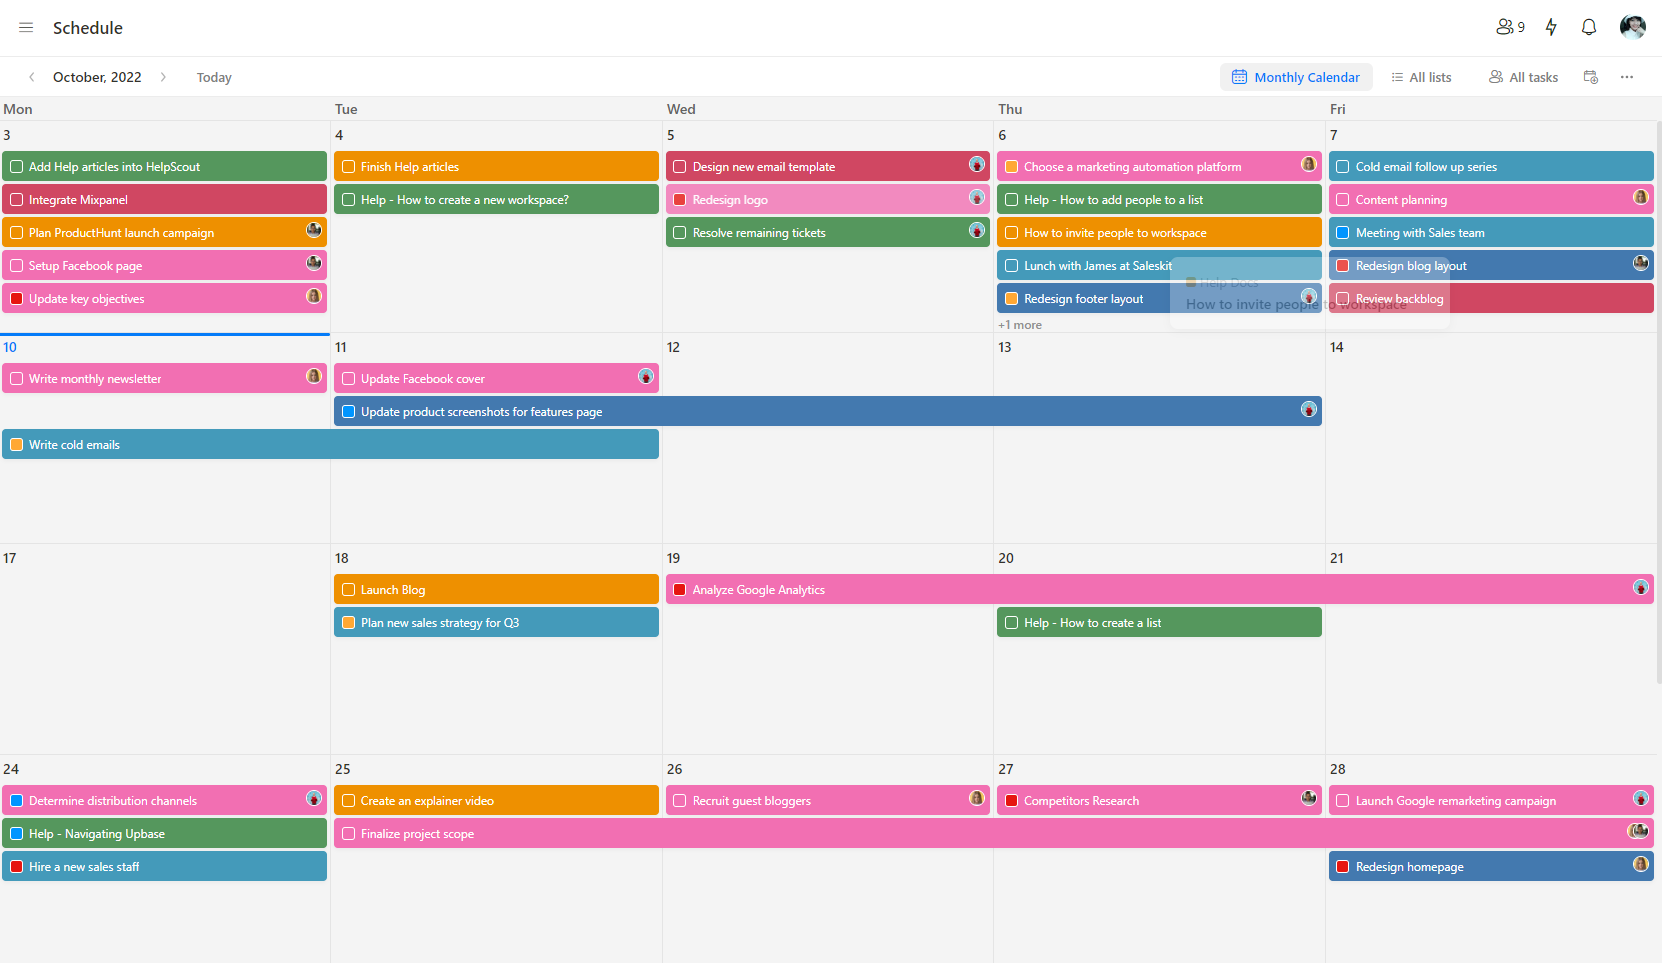 Upbase Monthly Calendar view